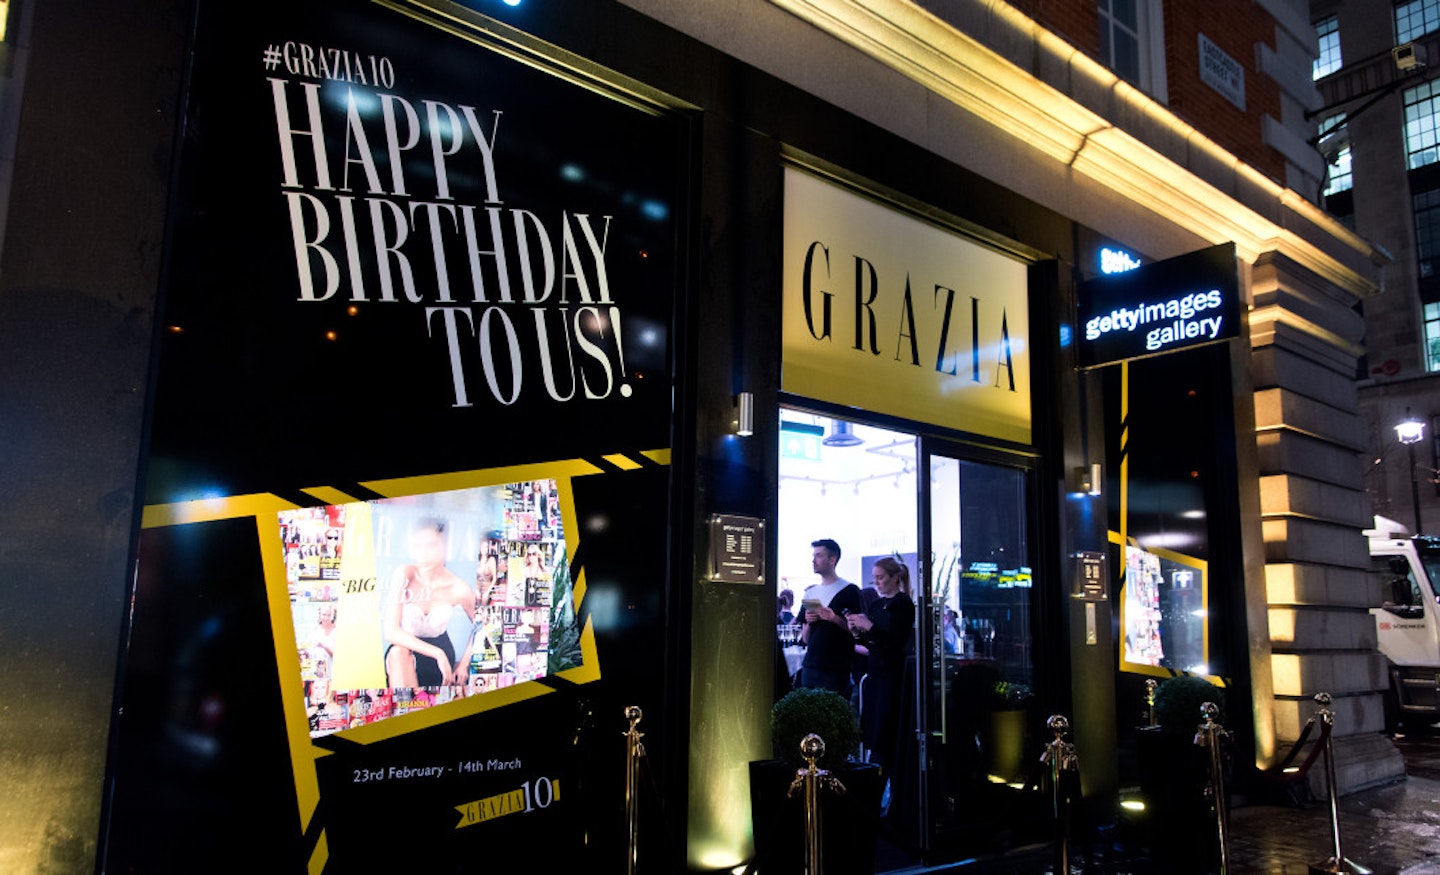 GALLERY >> Inside the preview of the #Grazia10 exhibition